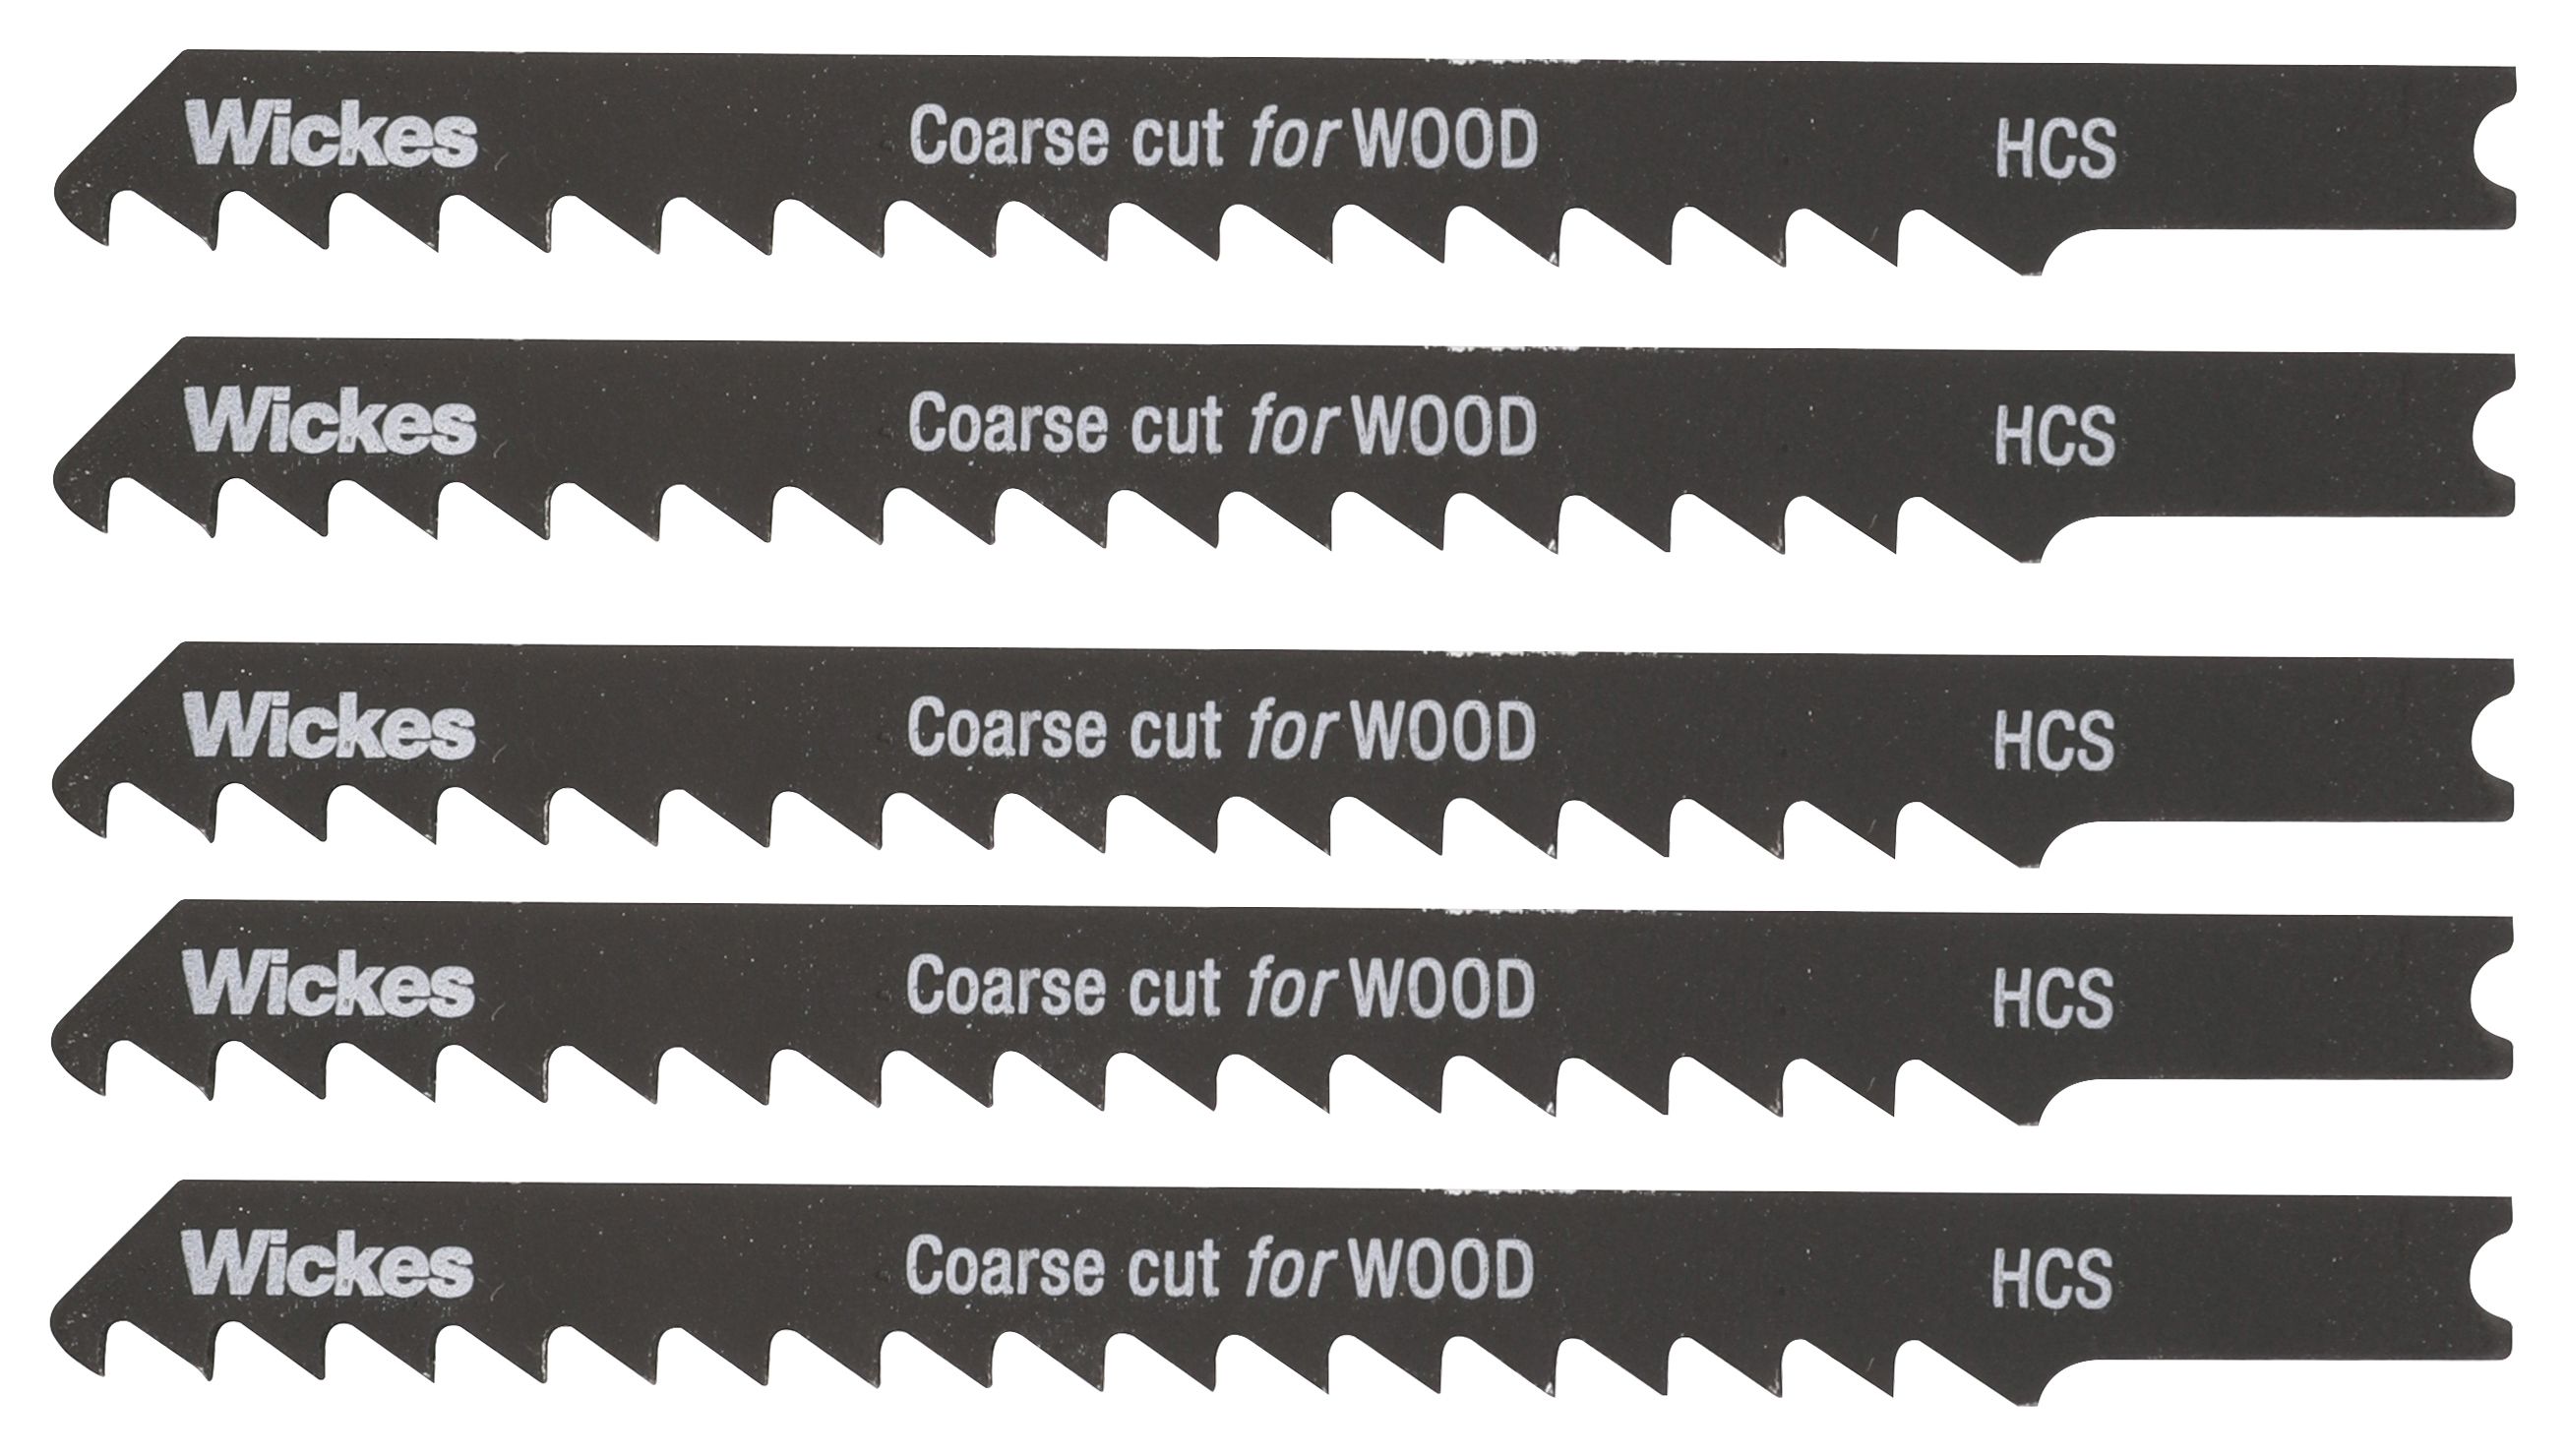 Wickes Universal Shank Coarse Cut Jigsaw Blade For Wood - Pack Of 5